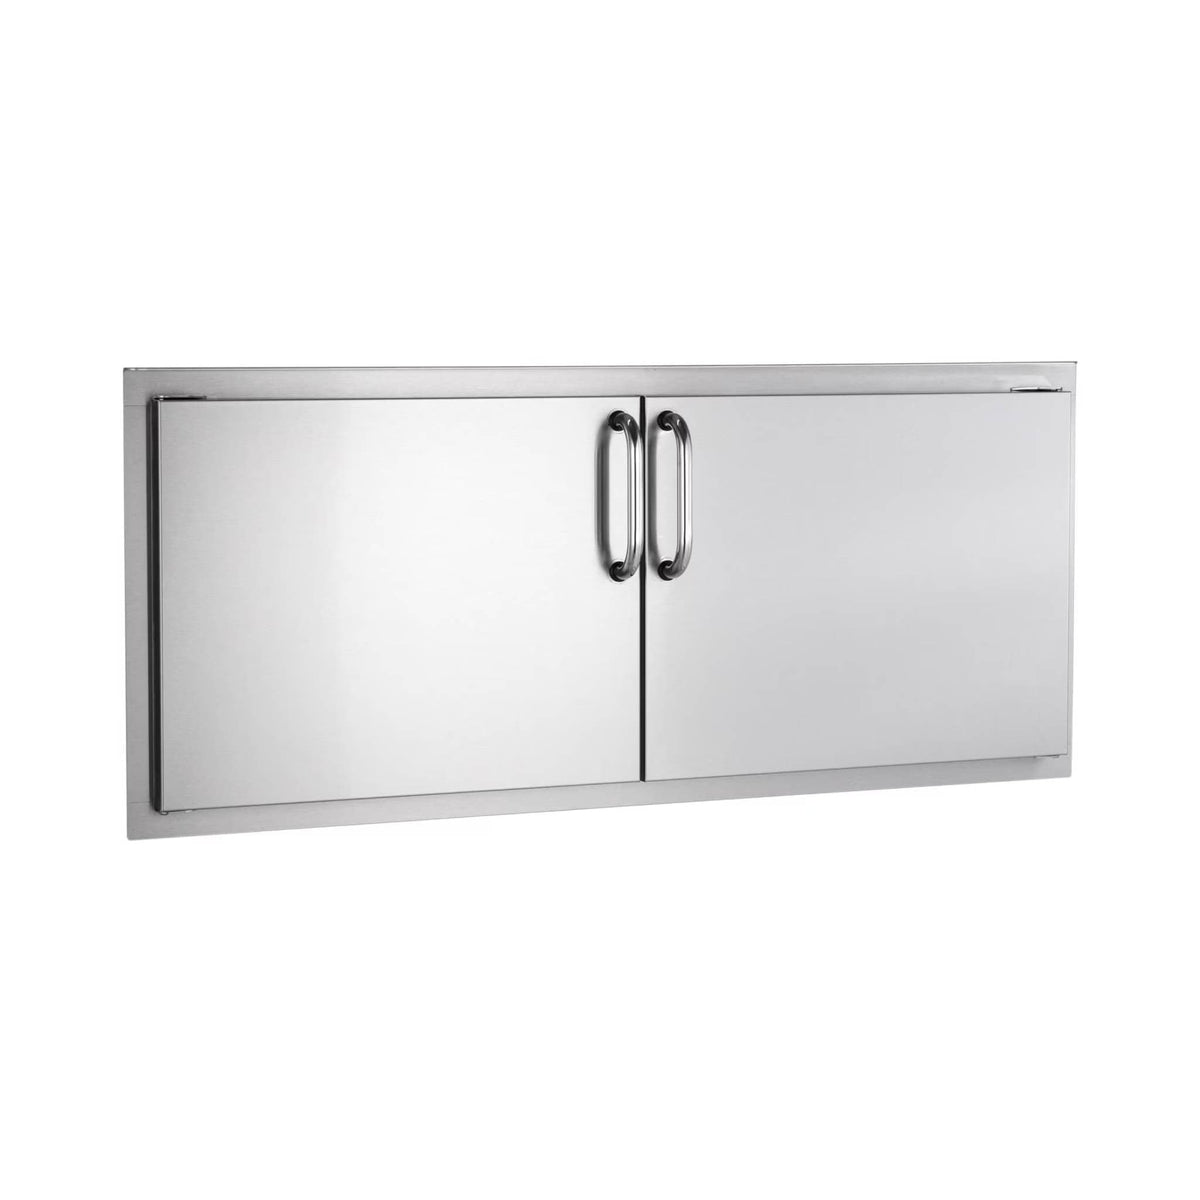 AOG 39&quot; Double Access Door - Culinary Hardware